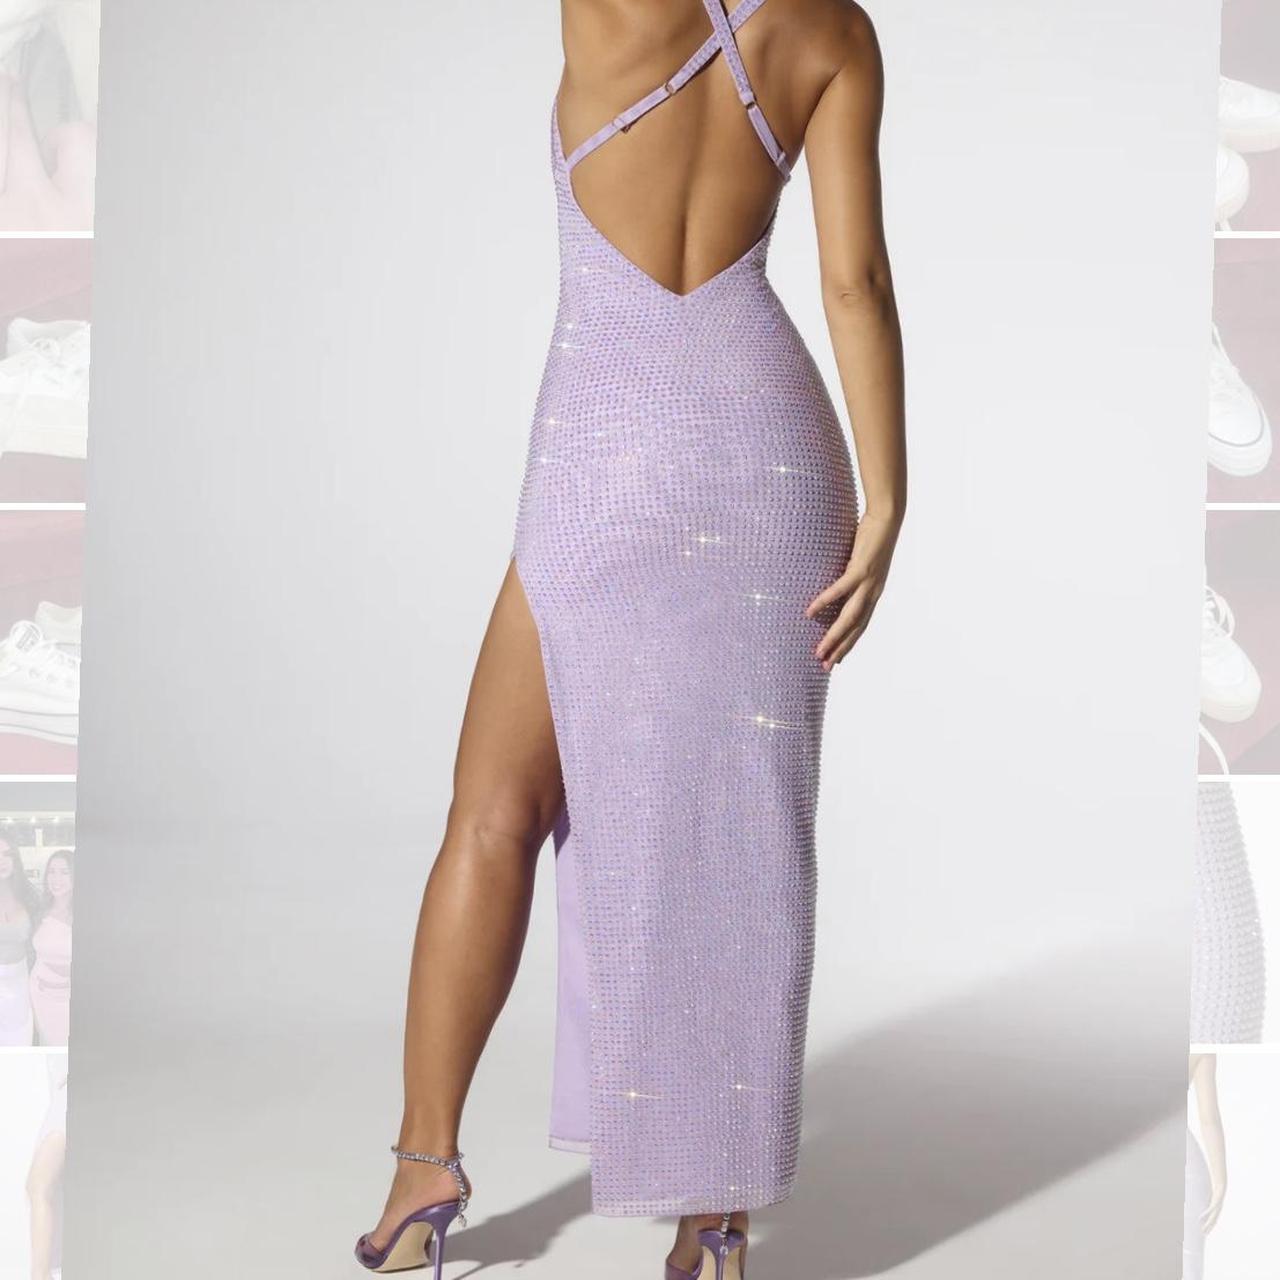 Palmira Embellished Plunge Neck Low Back Evening Gown in Lilac